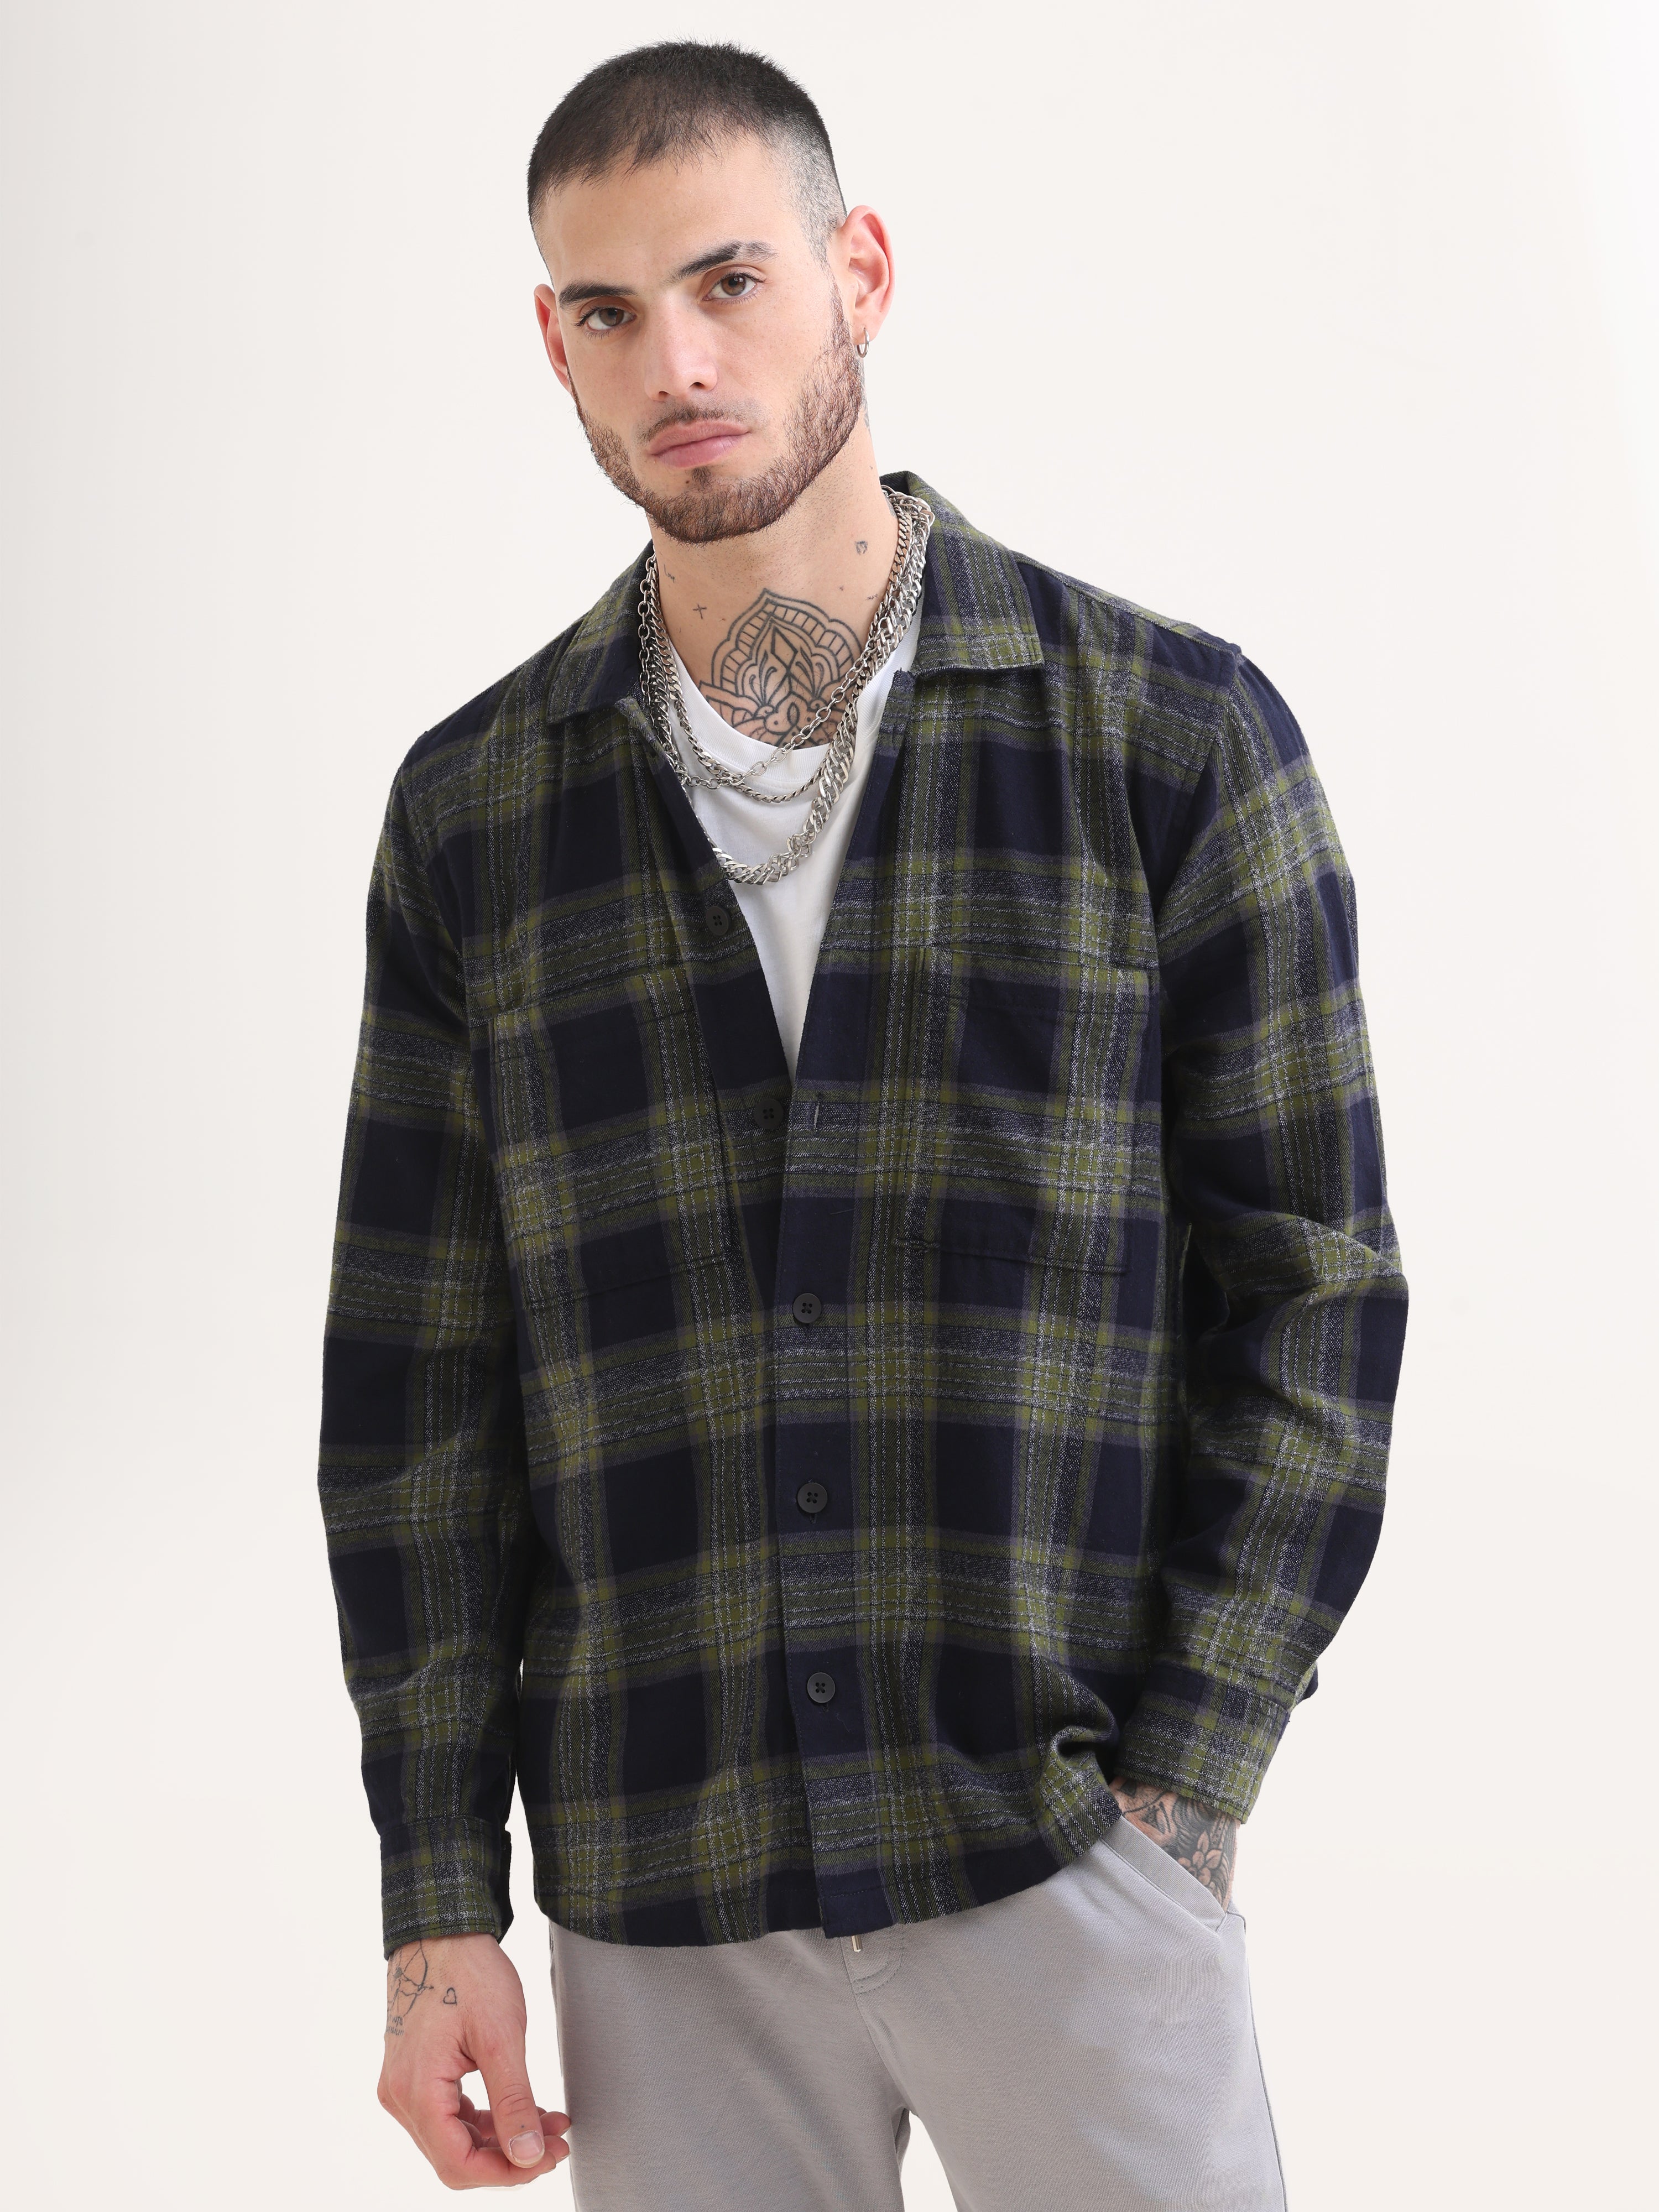 Lawn Green & Black Brushed Check ShacketRs. 1599.00